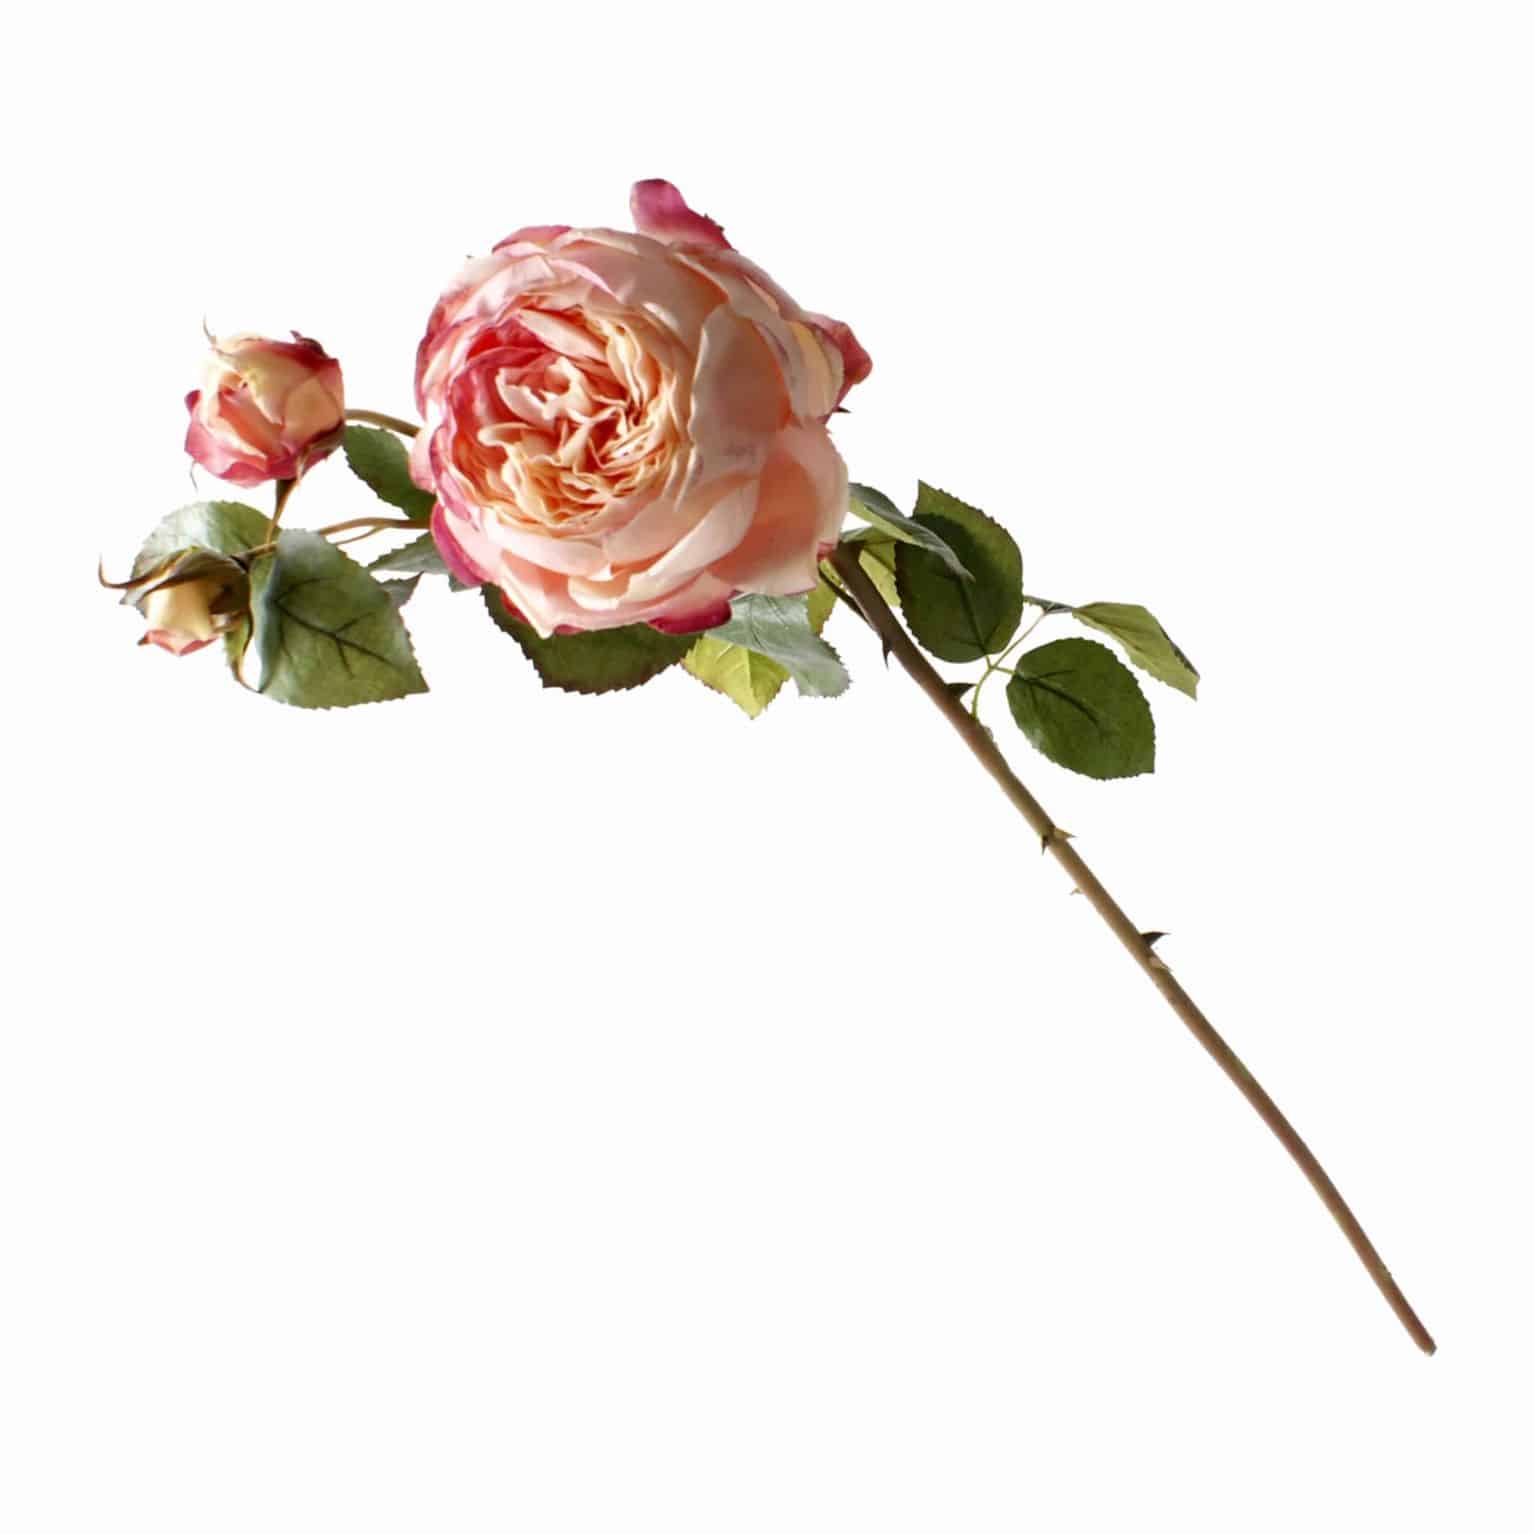 A British favourite faux rose and masterpiece of design. Includes budding heads